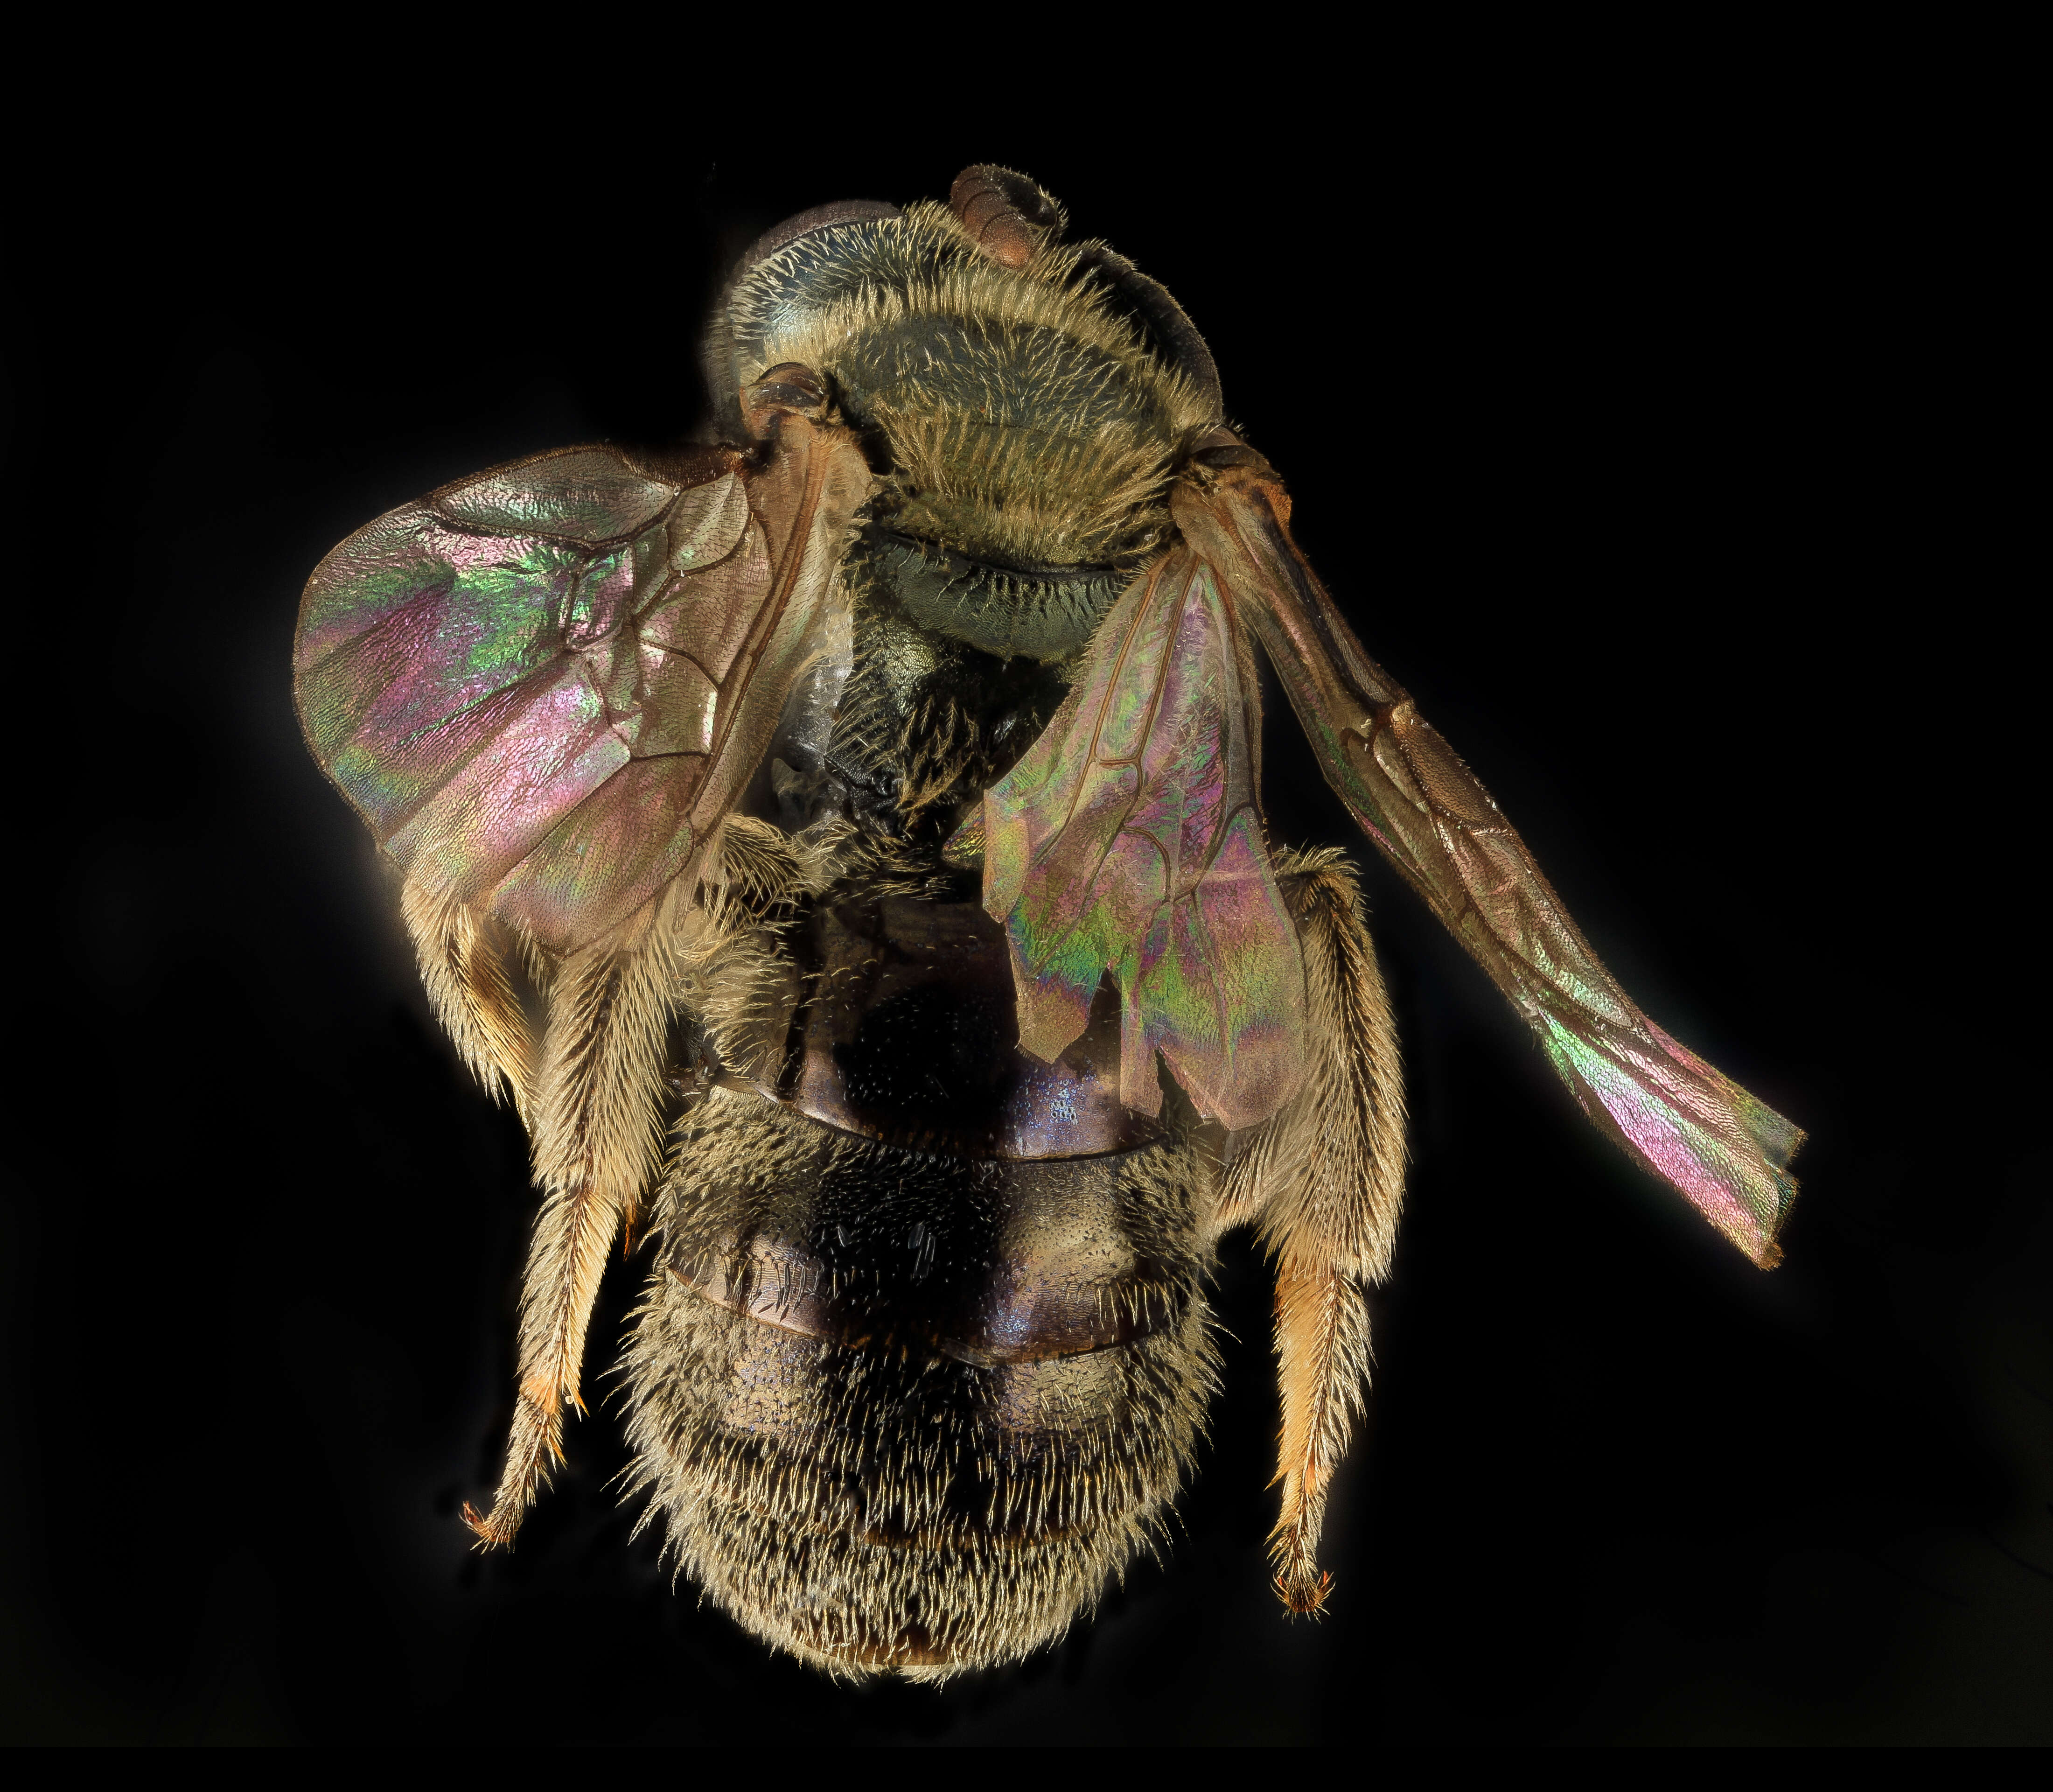 Image of sweat bees